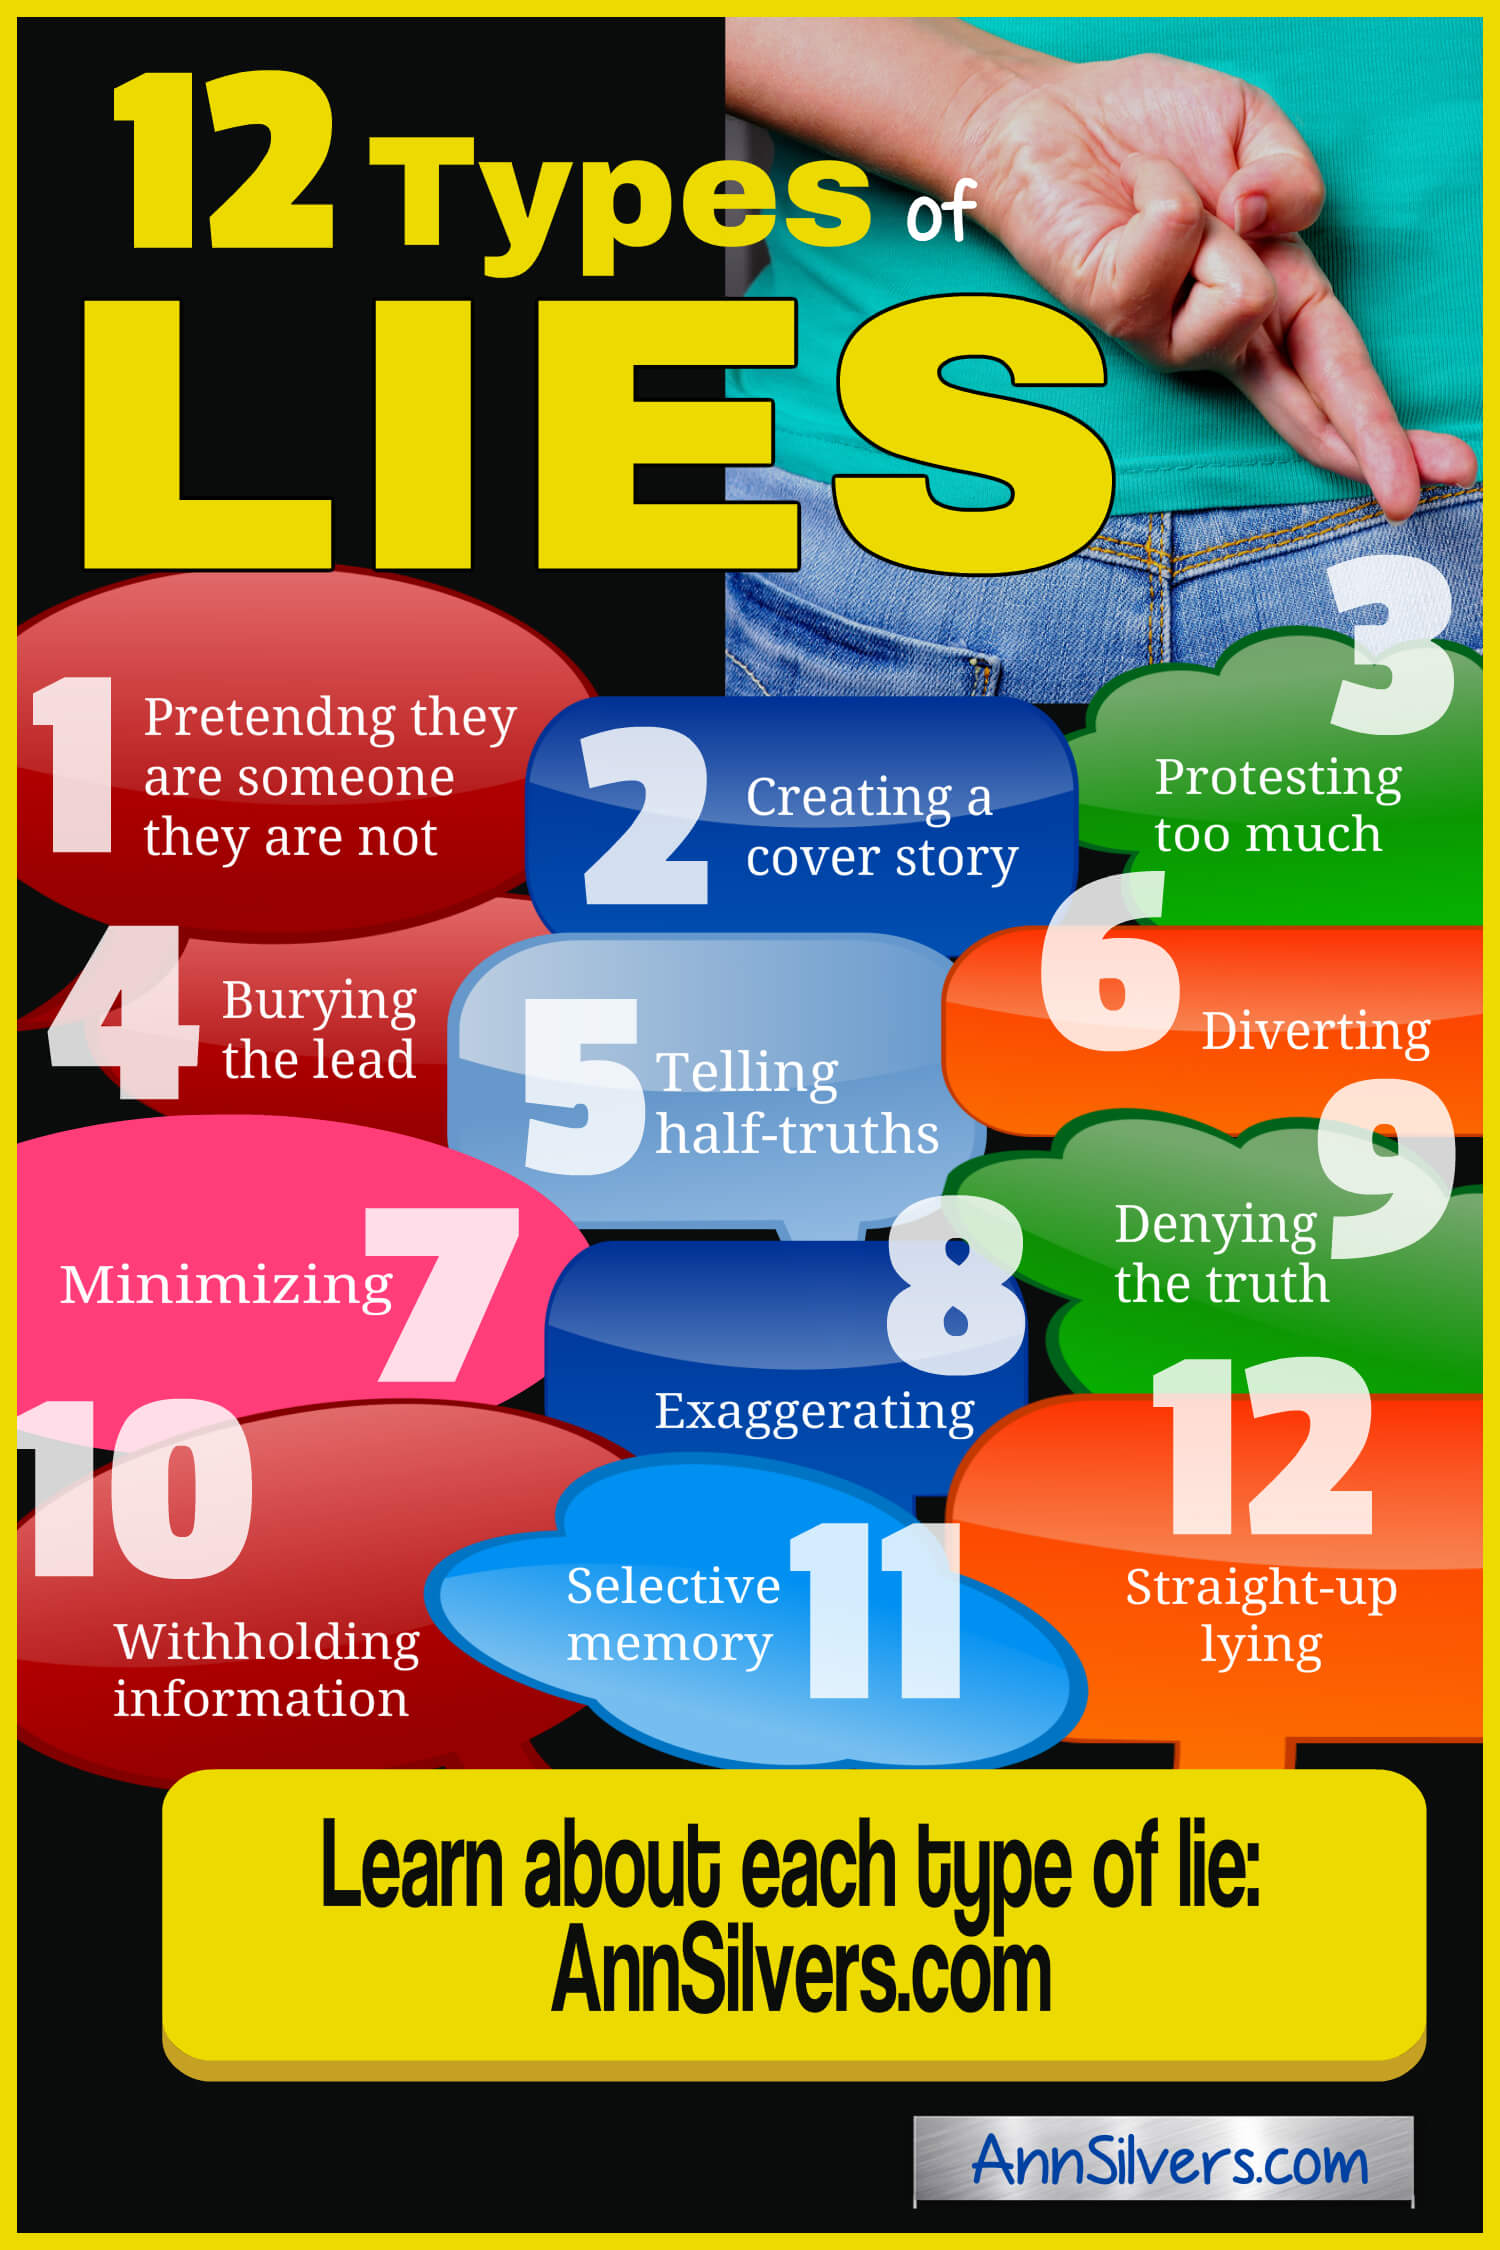 12 Types of Lies and Deception Infographic, Lies and Deceit, Not Telling the Truth